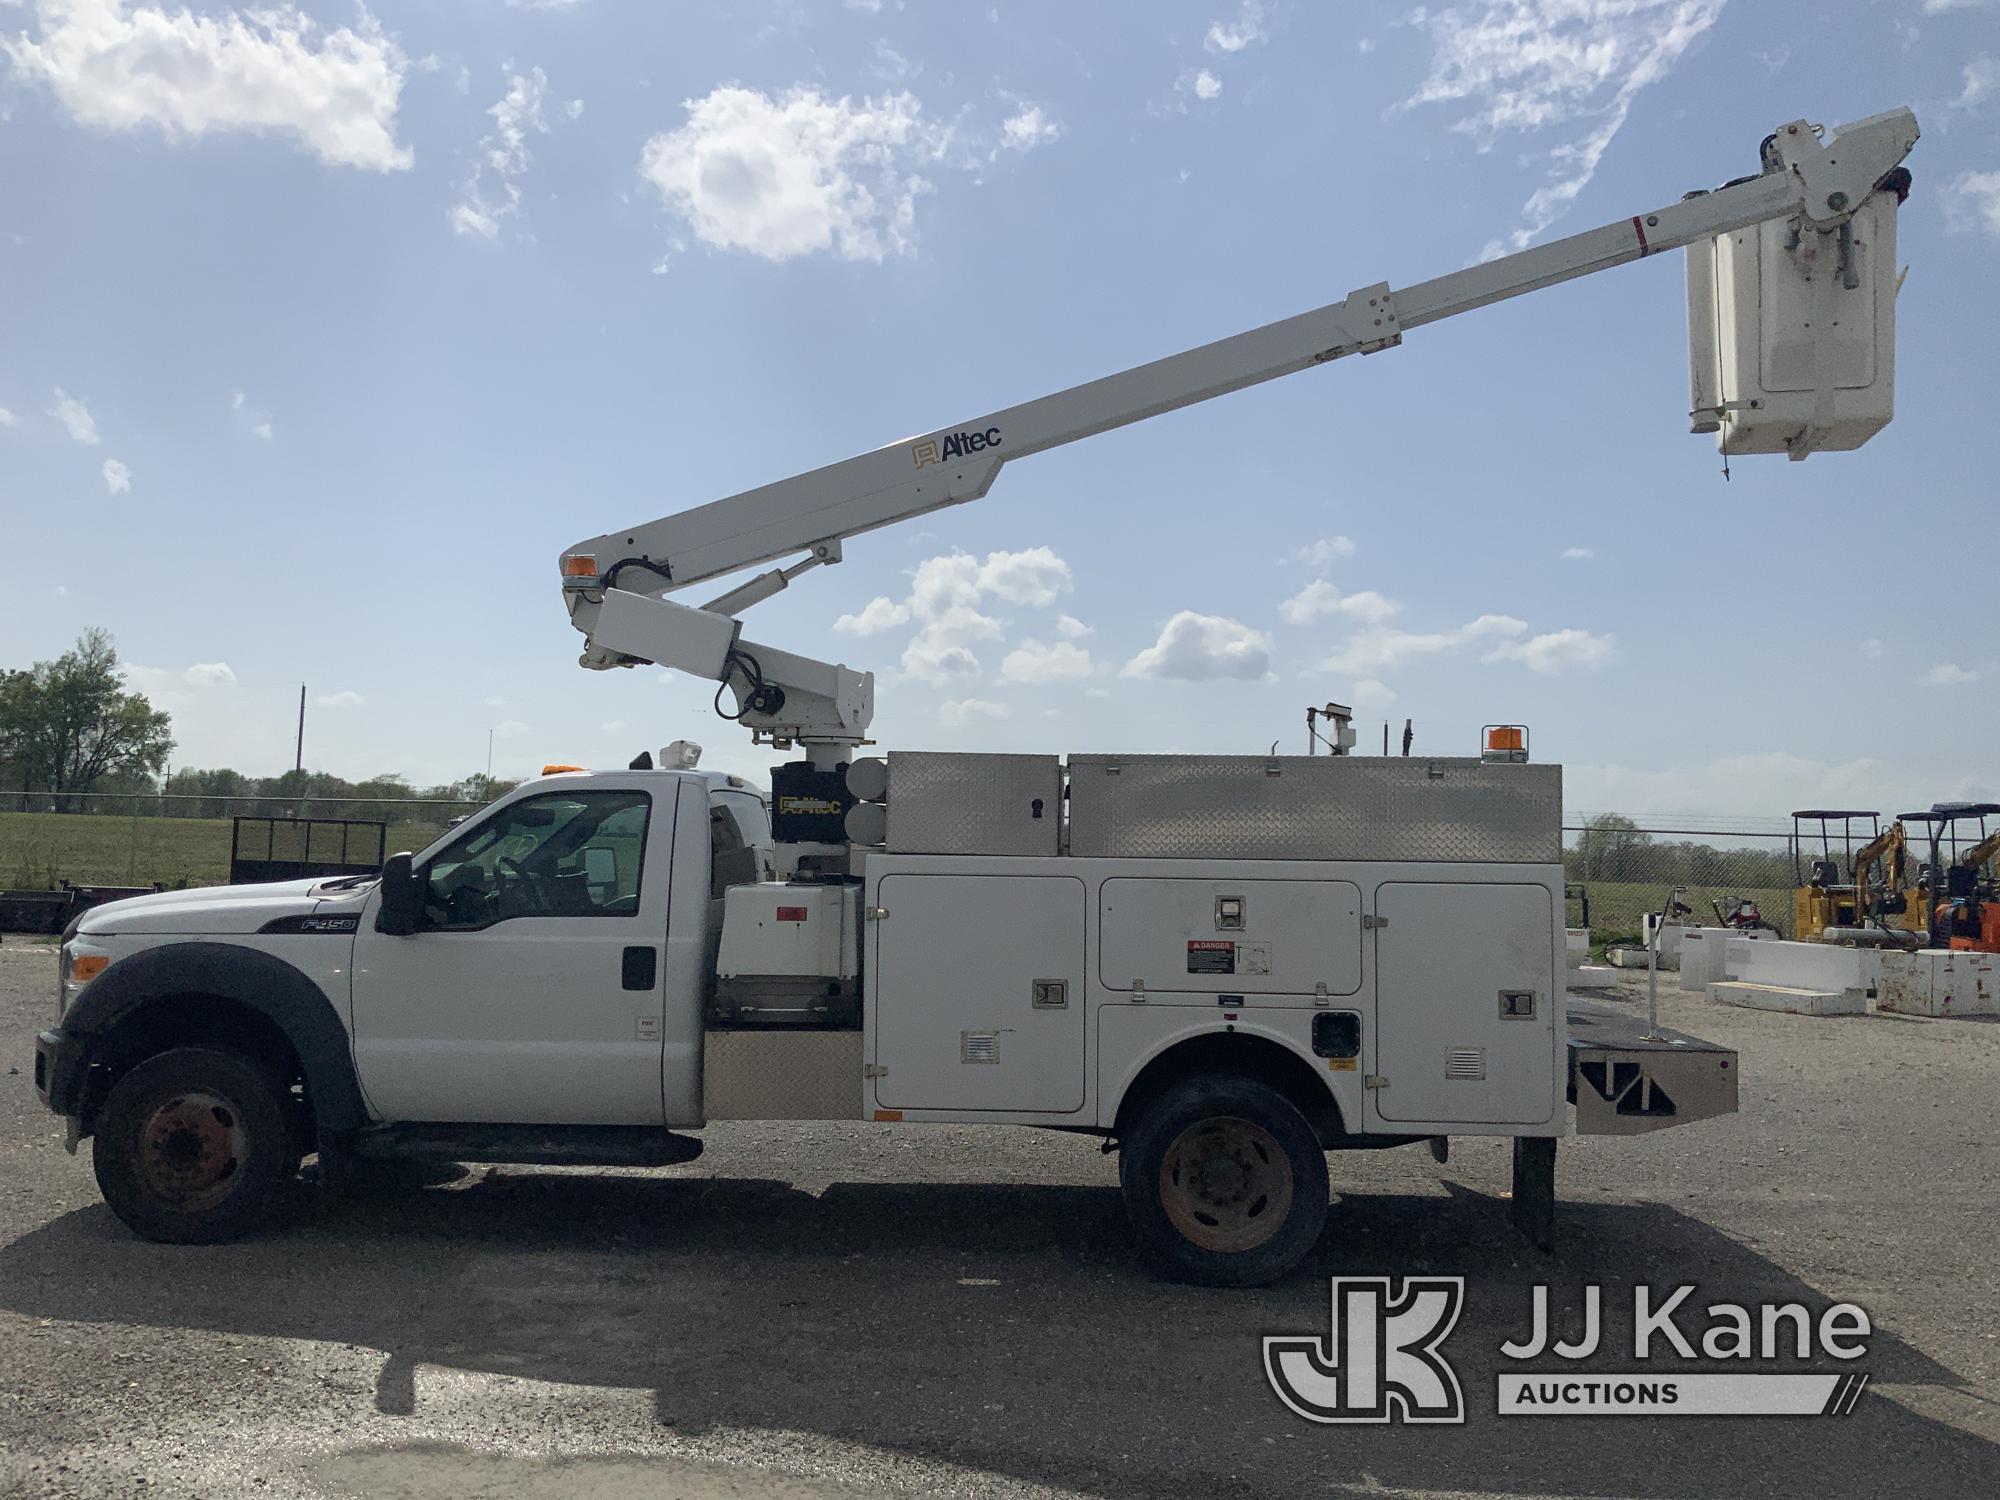 (Hawk Point, MO) Altec AT200A, Telescopic Non-Insulated Bucket Truck mounted behind cab on 2012 Ford